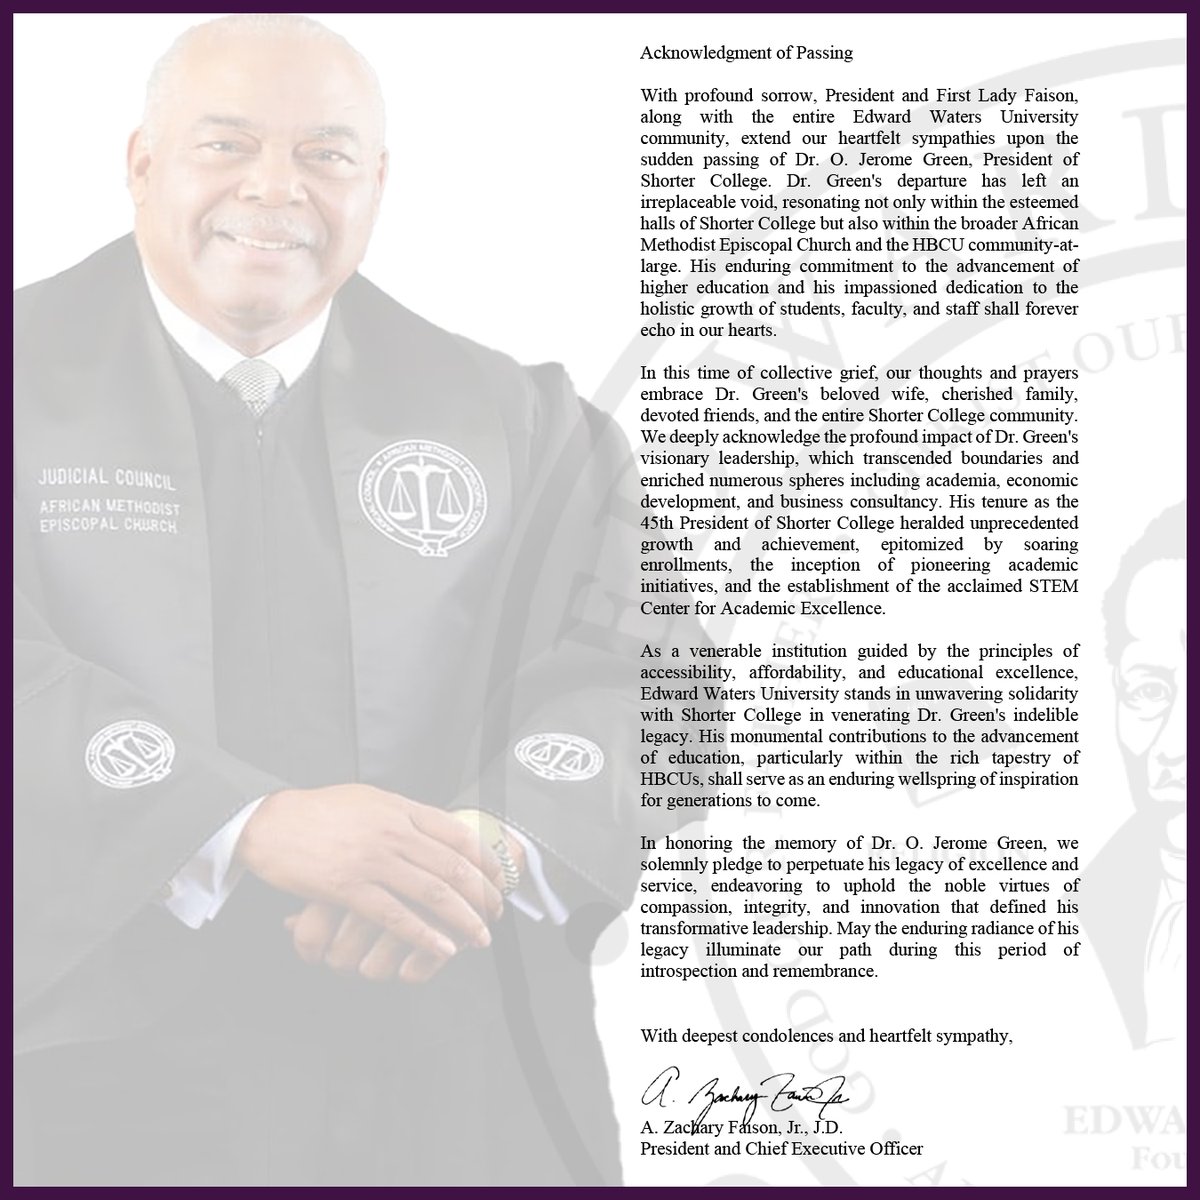 🕊️ Honoring the Legacy of Dr. O. Jerome Green 🕊️ With heavy hearts, we extend our deepest sympathies to the Shorter College community on the passing of Dr. O. Jerome Green. His visionary leadership will forever inspire us. May his legacy continue to shine brightly.